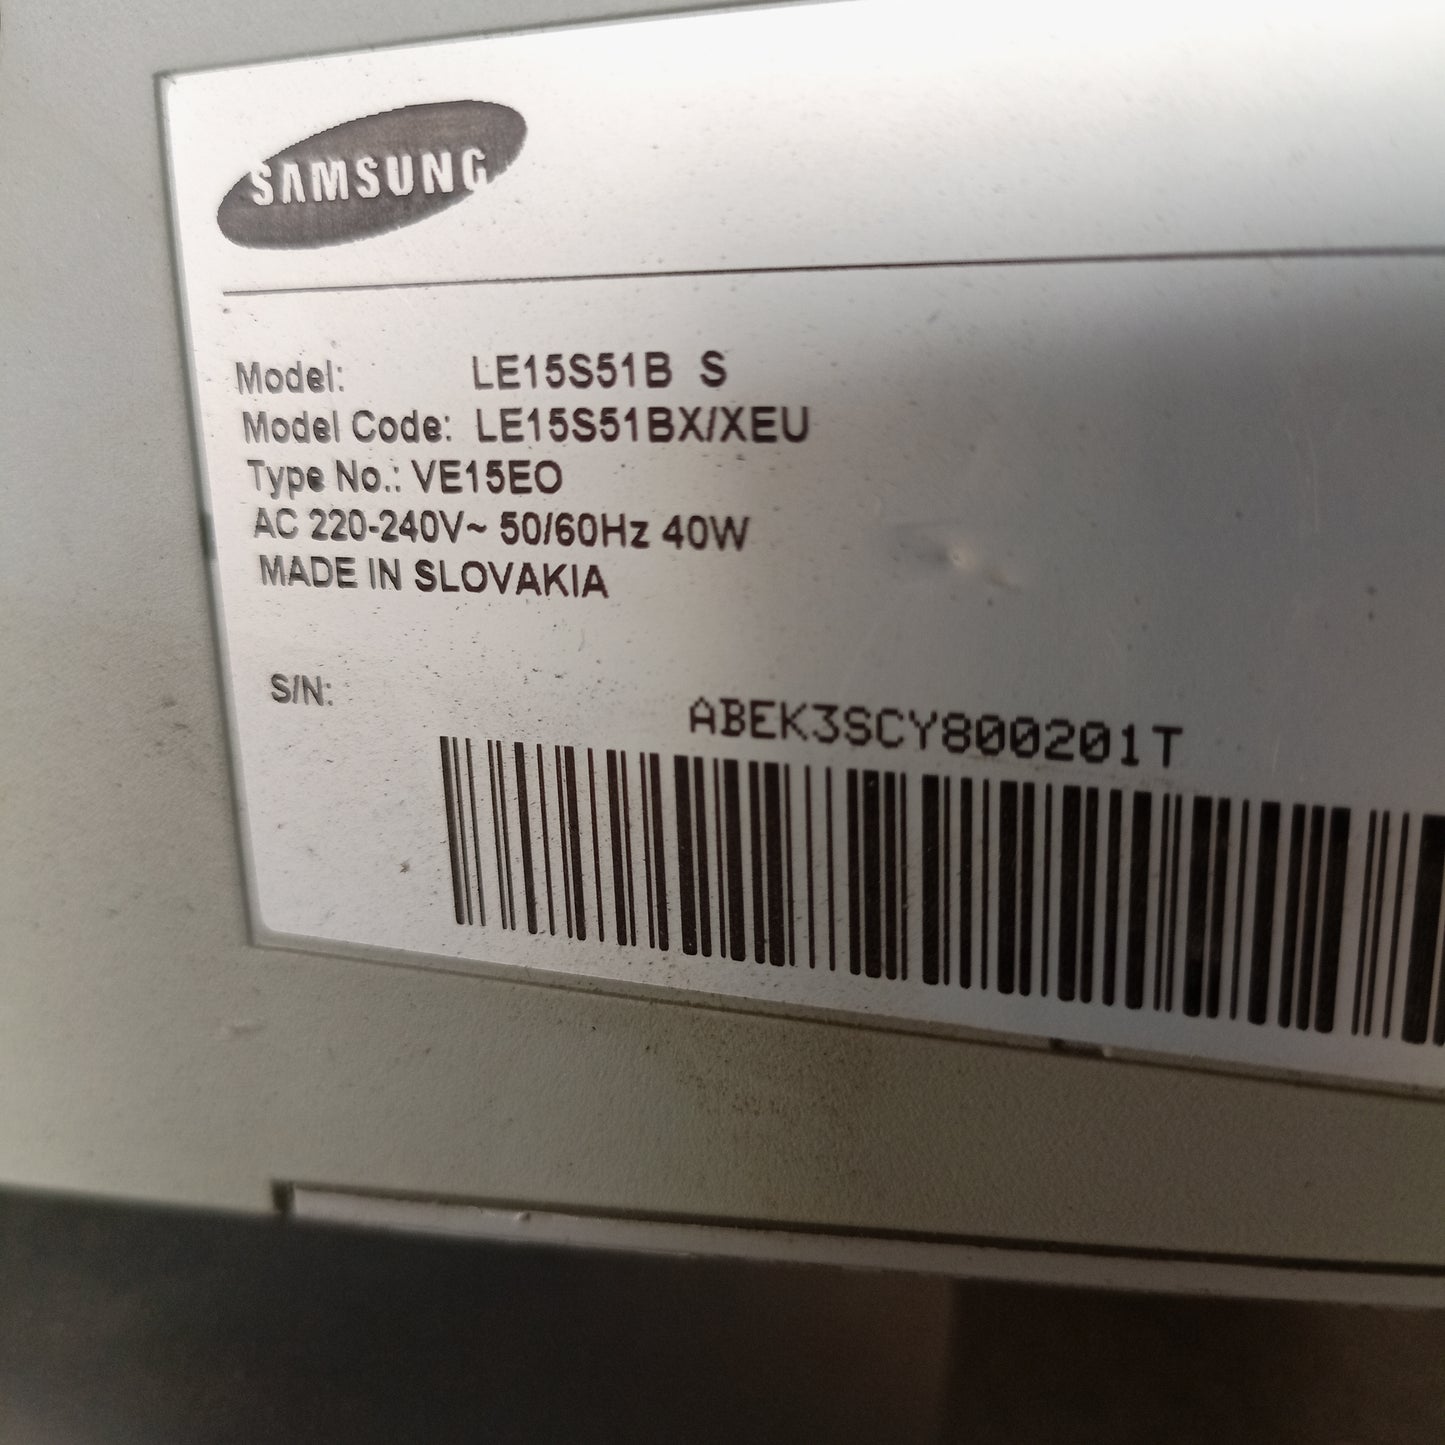 SAMSUNG 15 Inch LE15S51B LCD TV - Model number sticker